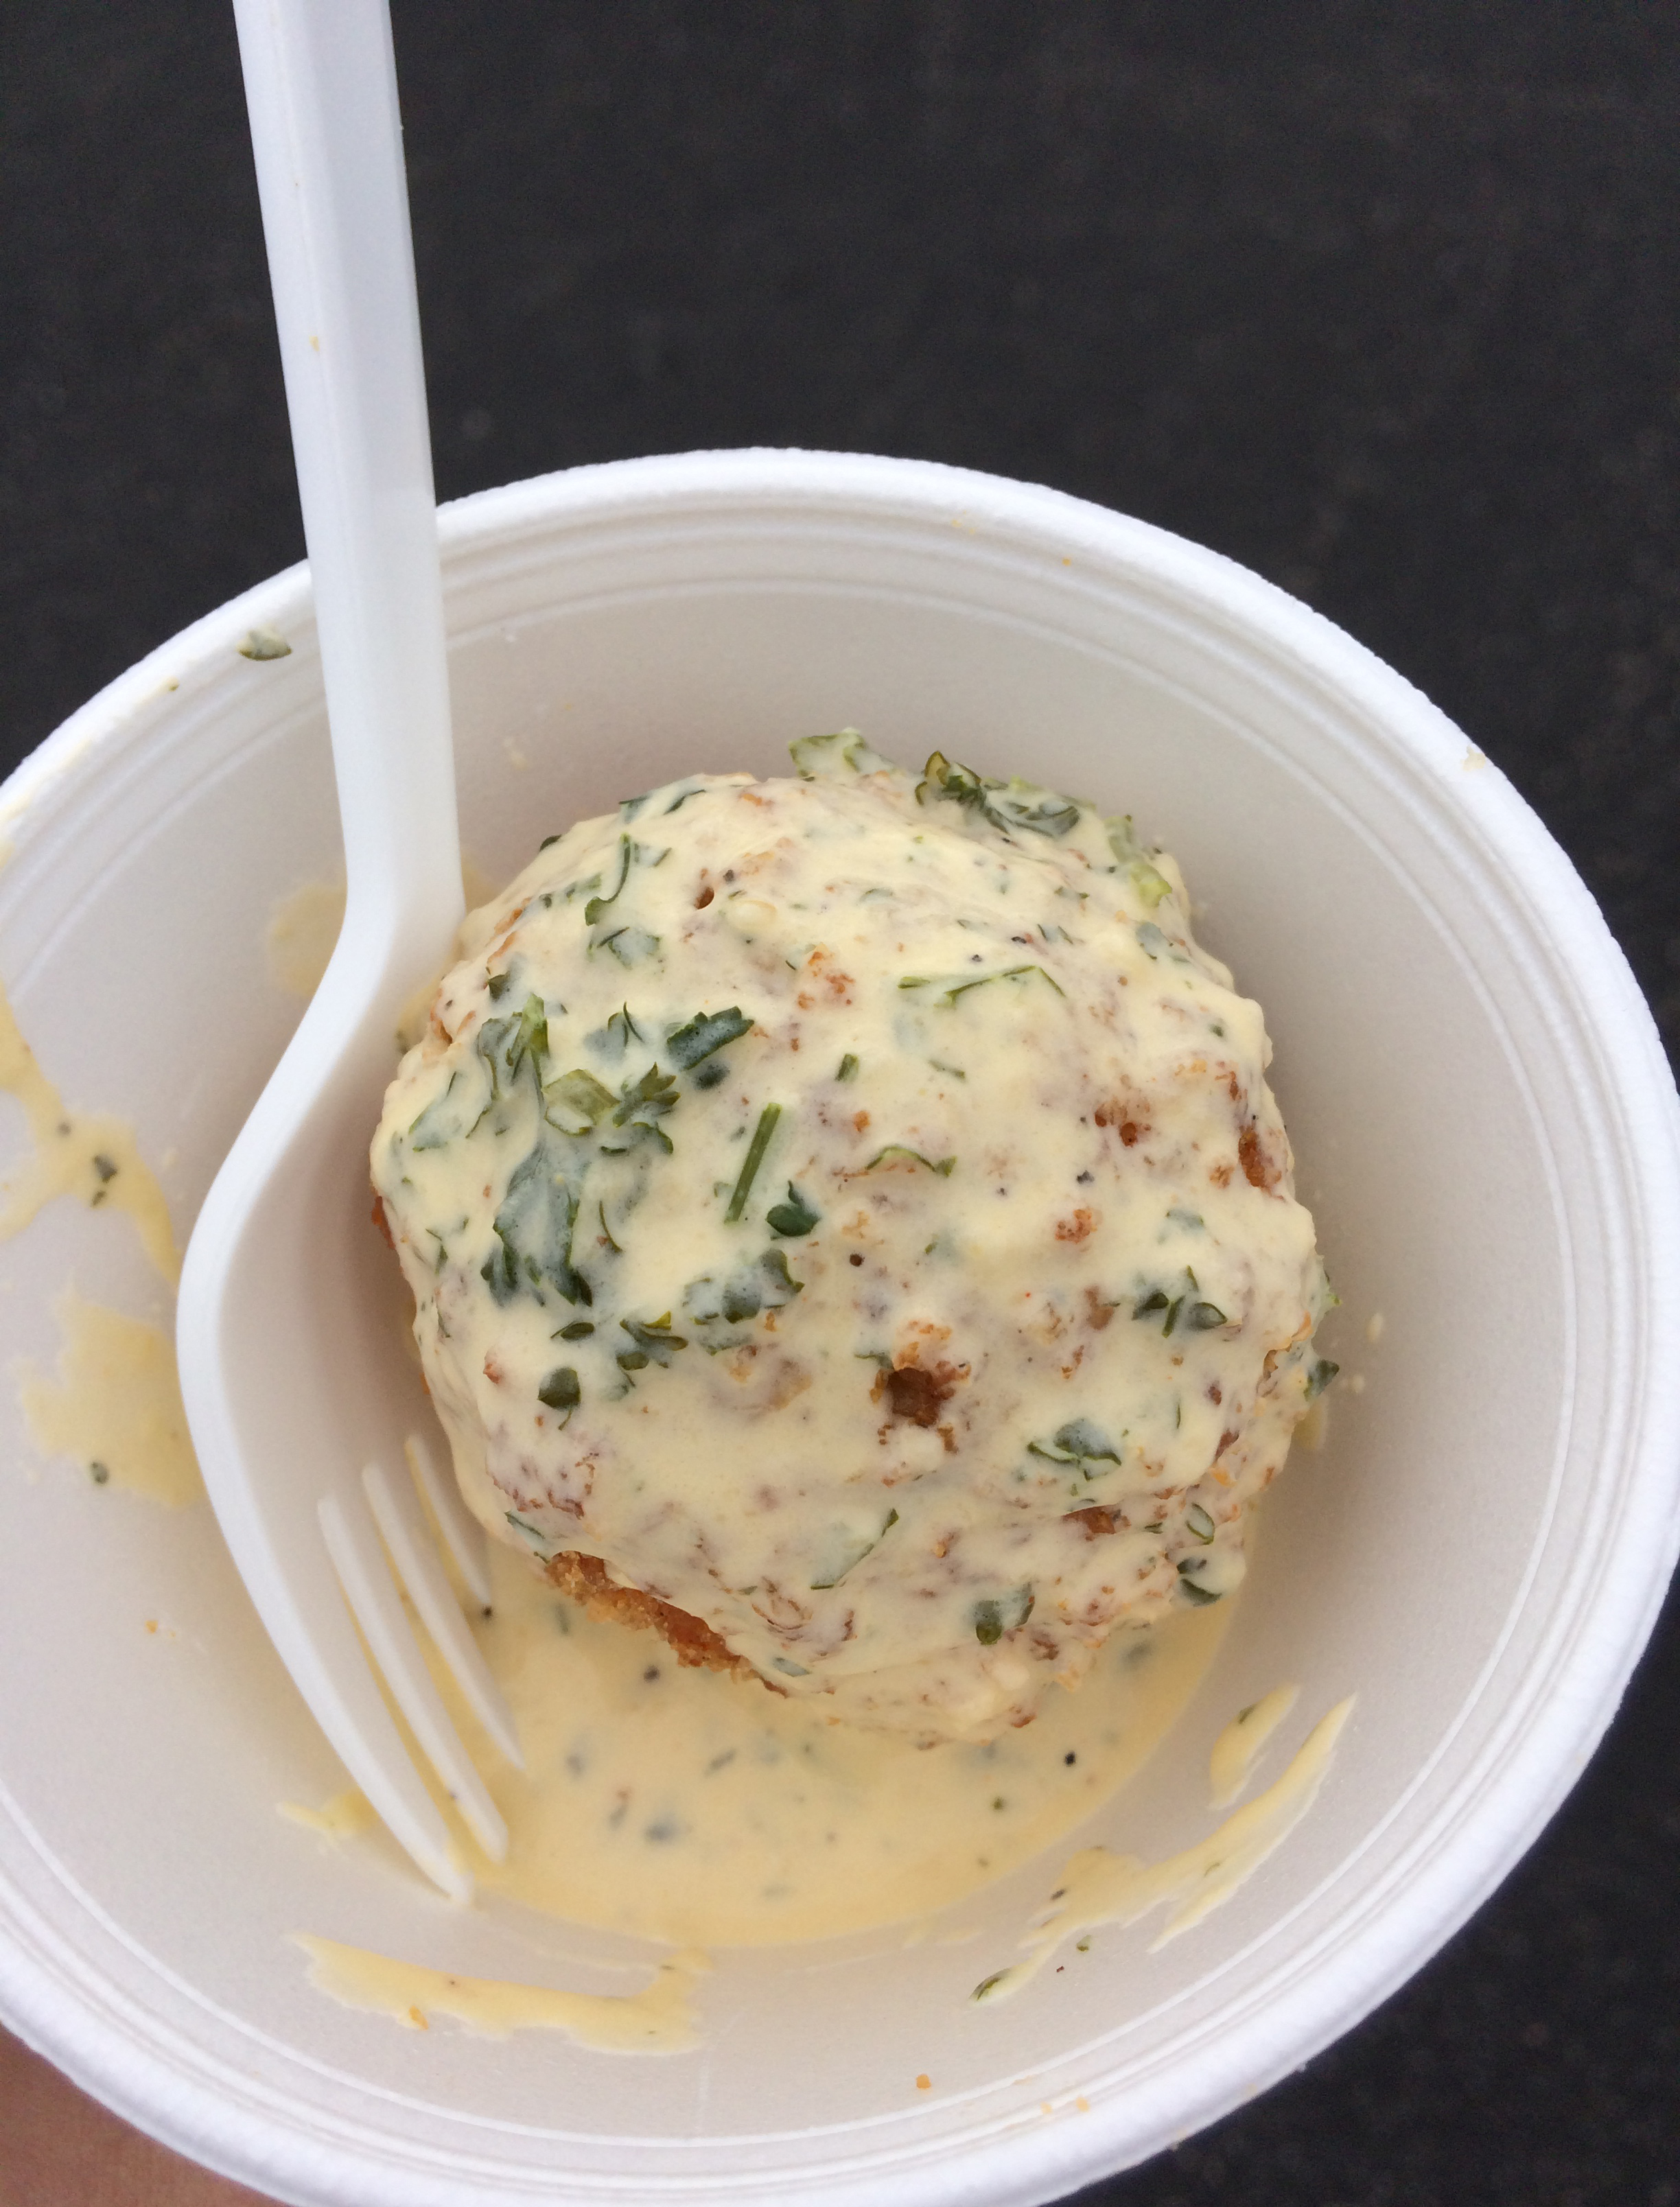 This was the mac and cheese ball that Sidney liked the most at the Surf Dreams Foundation Mac-N-Cheese Cook Off